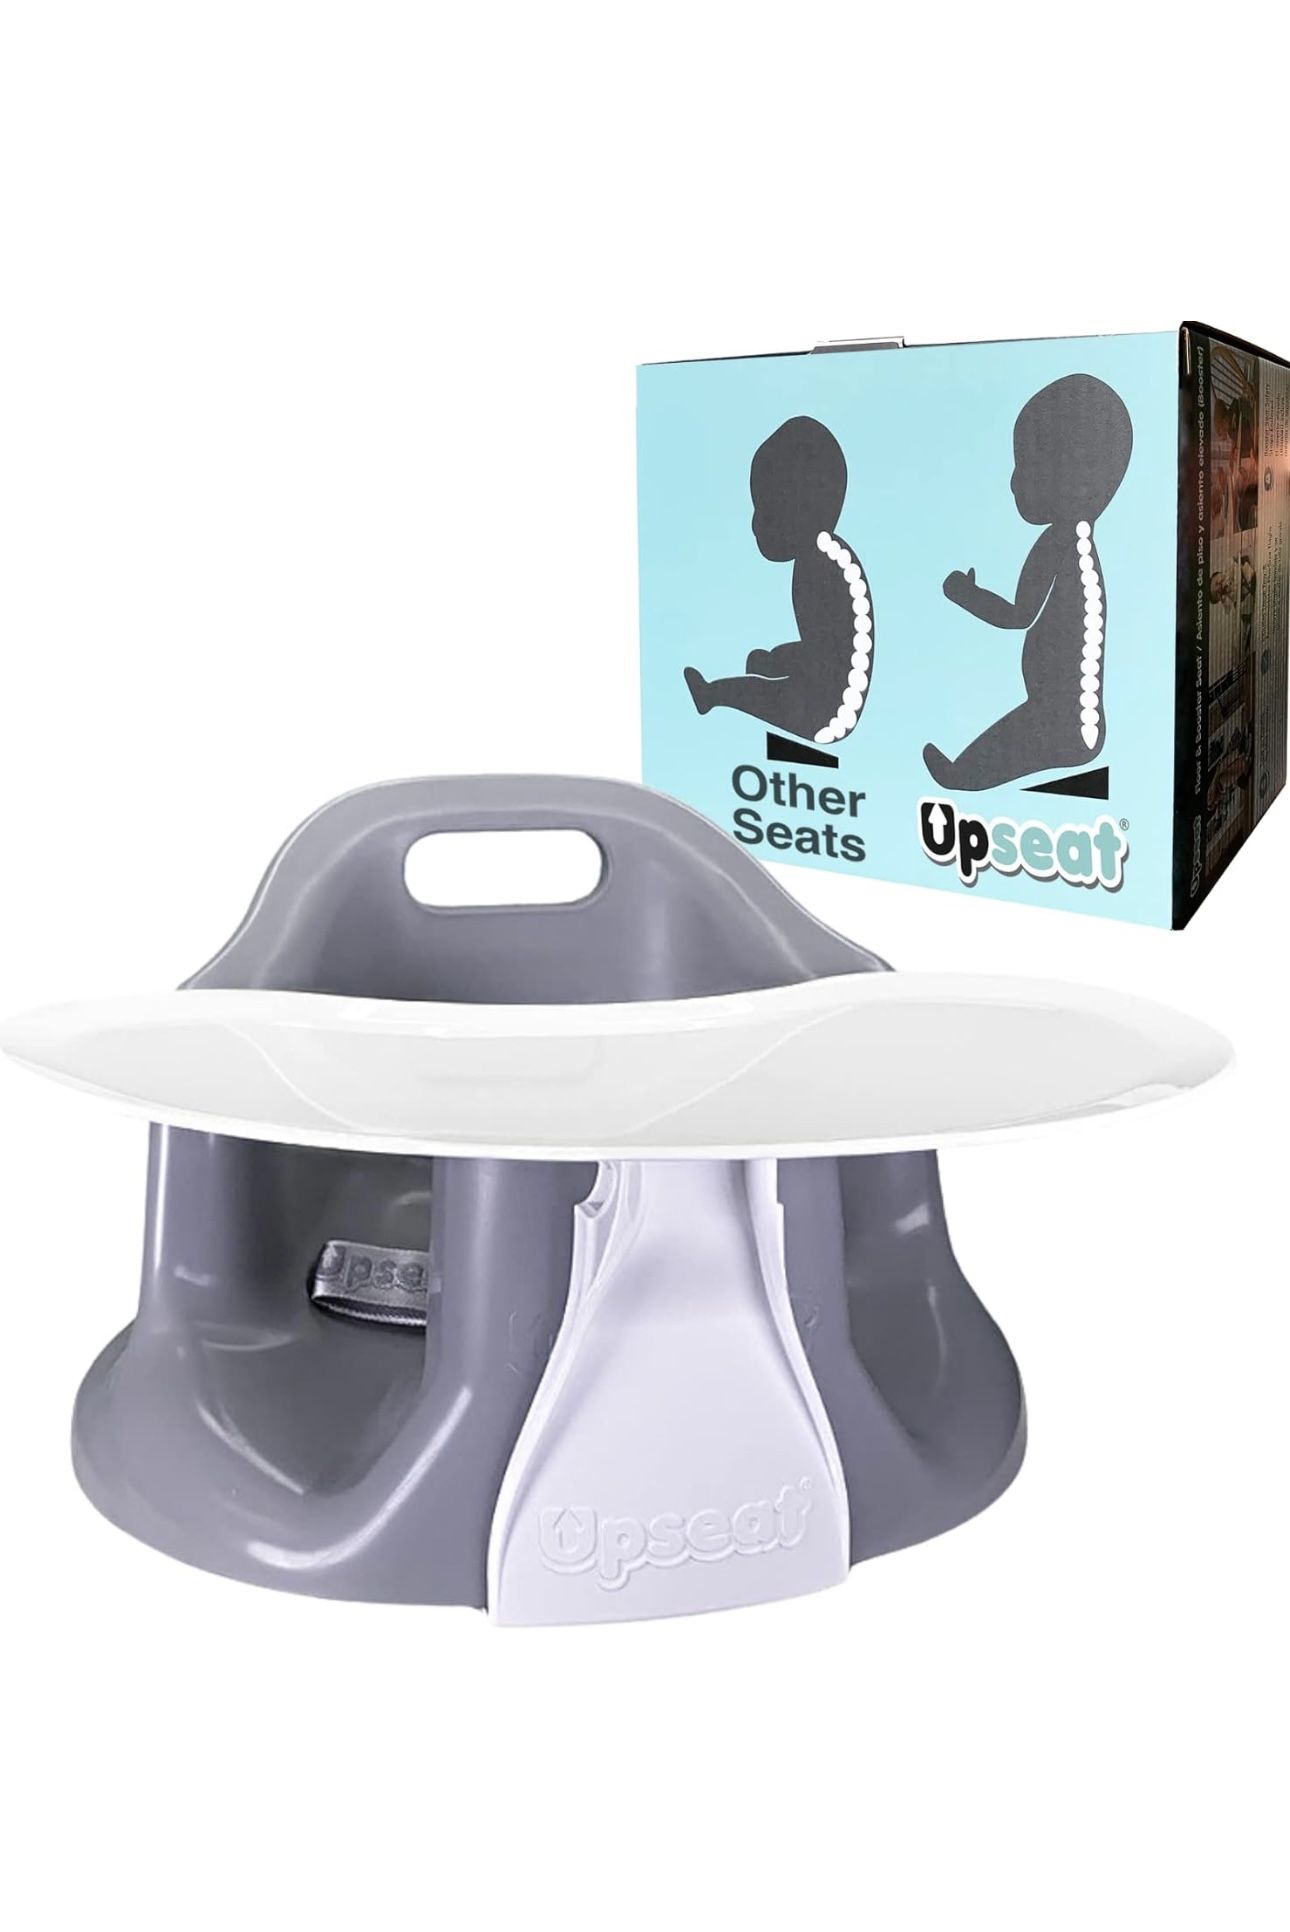 Upseat Baby Floor Seat Booster for Sitting Up with Removable Tray for Meals and Playtime